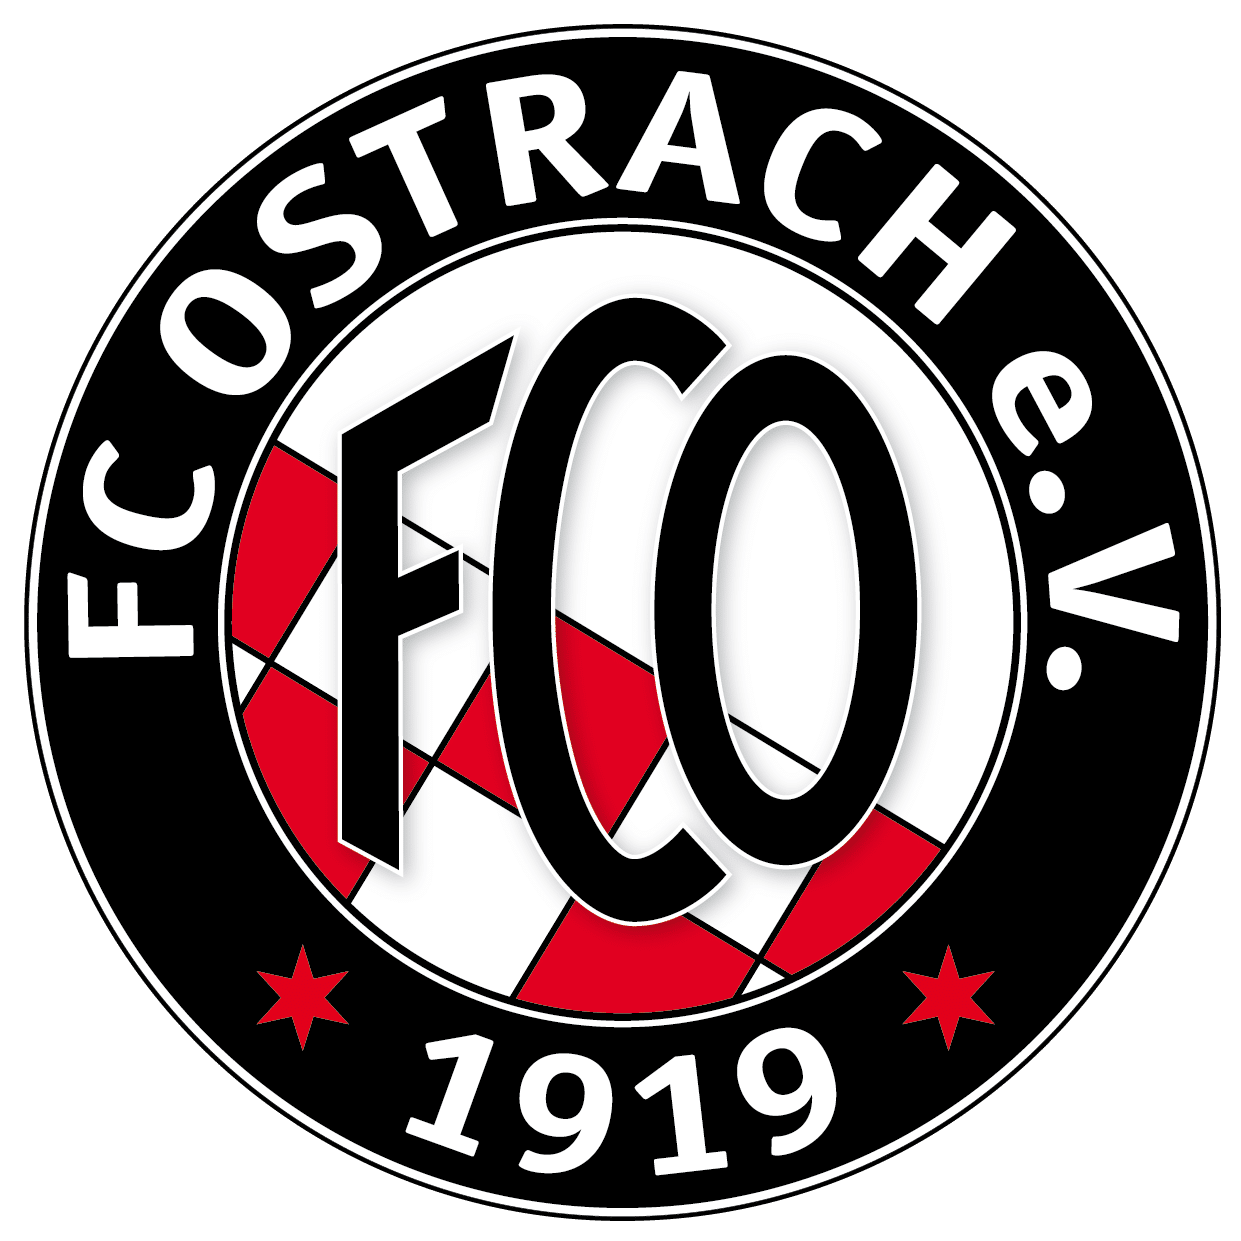 fcostrach